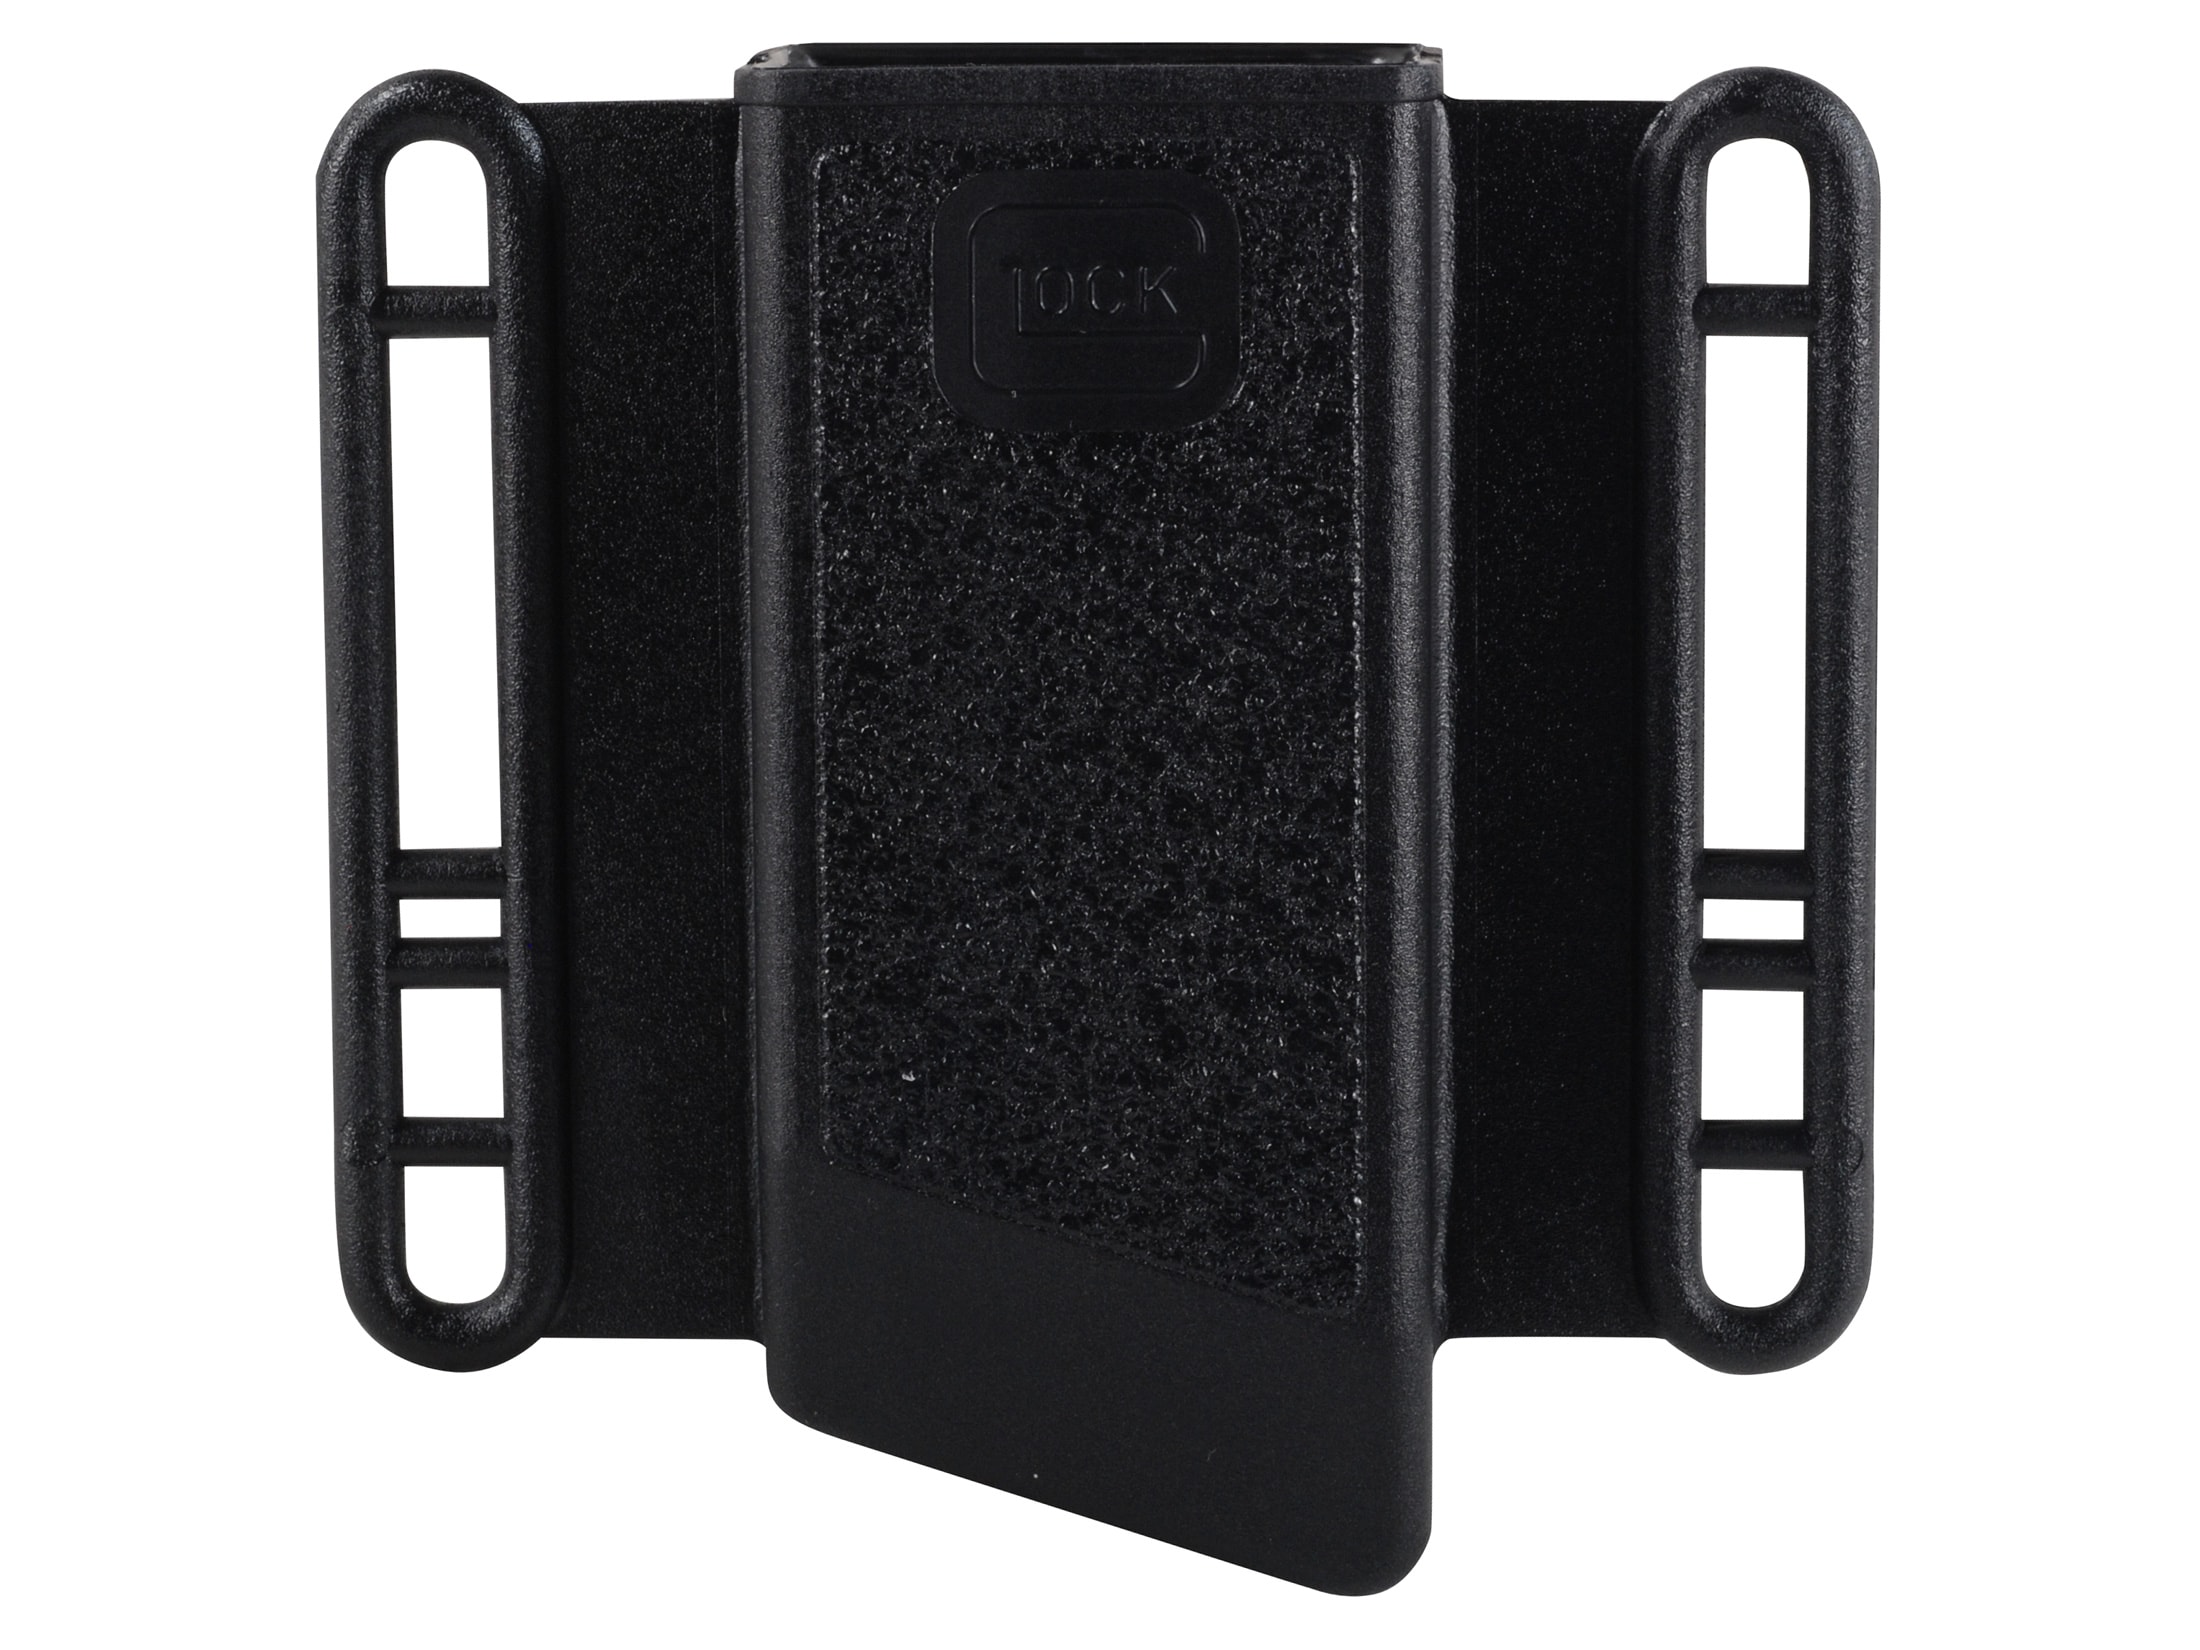 For Glock Double Magazine Holder Paddle Pouch 17,19,22,23,26,27,31,32,33,34.... 